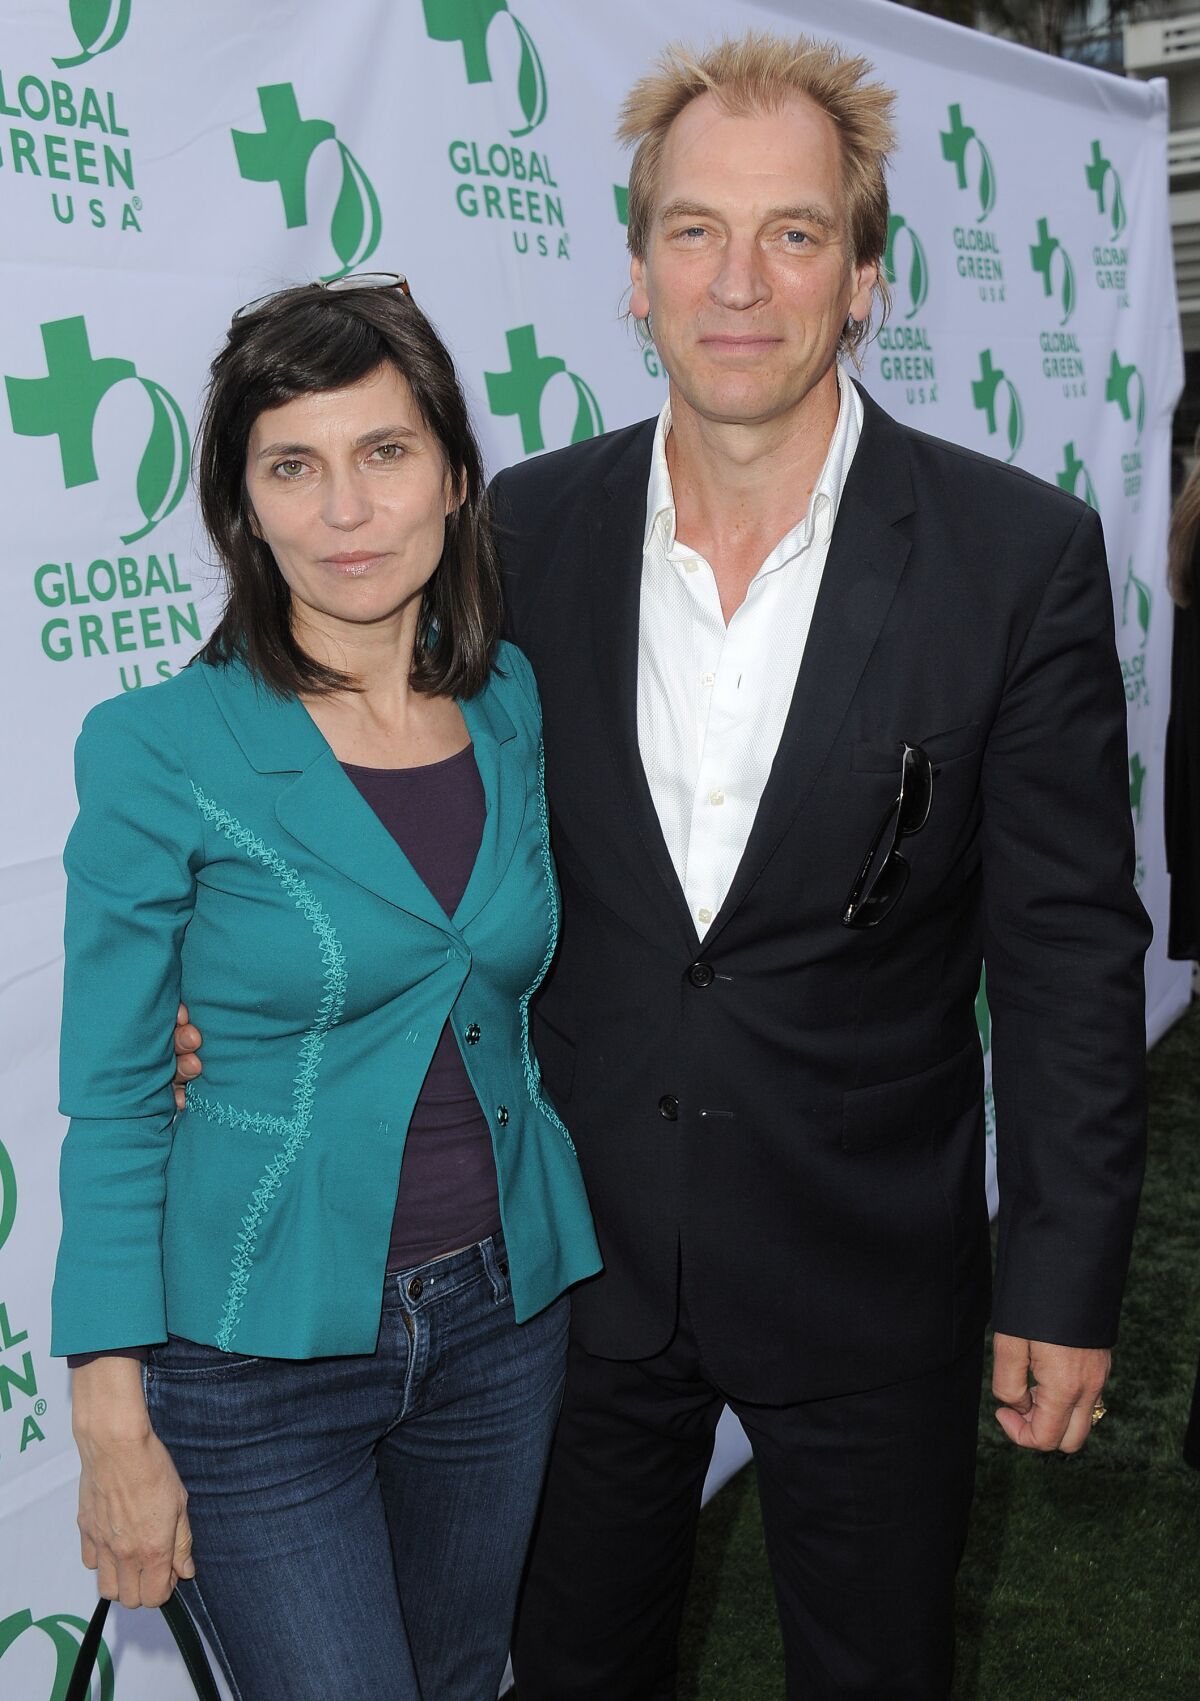 A woman in a green jacket and jeans poses for pictures with a  man in a white button-down shirt and black suit.